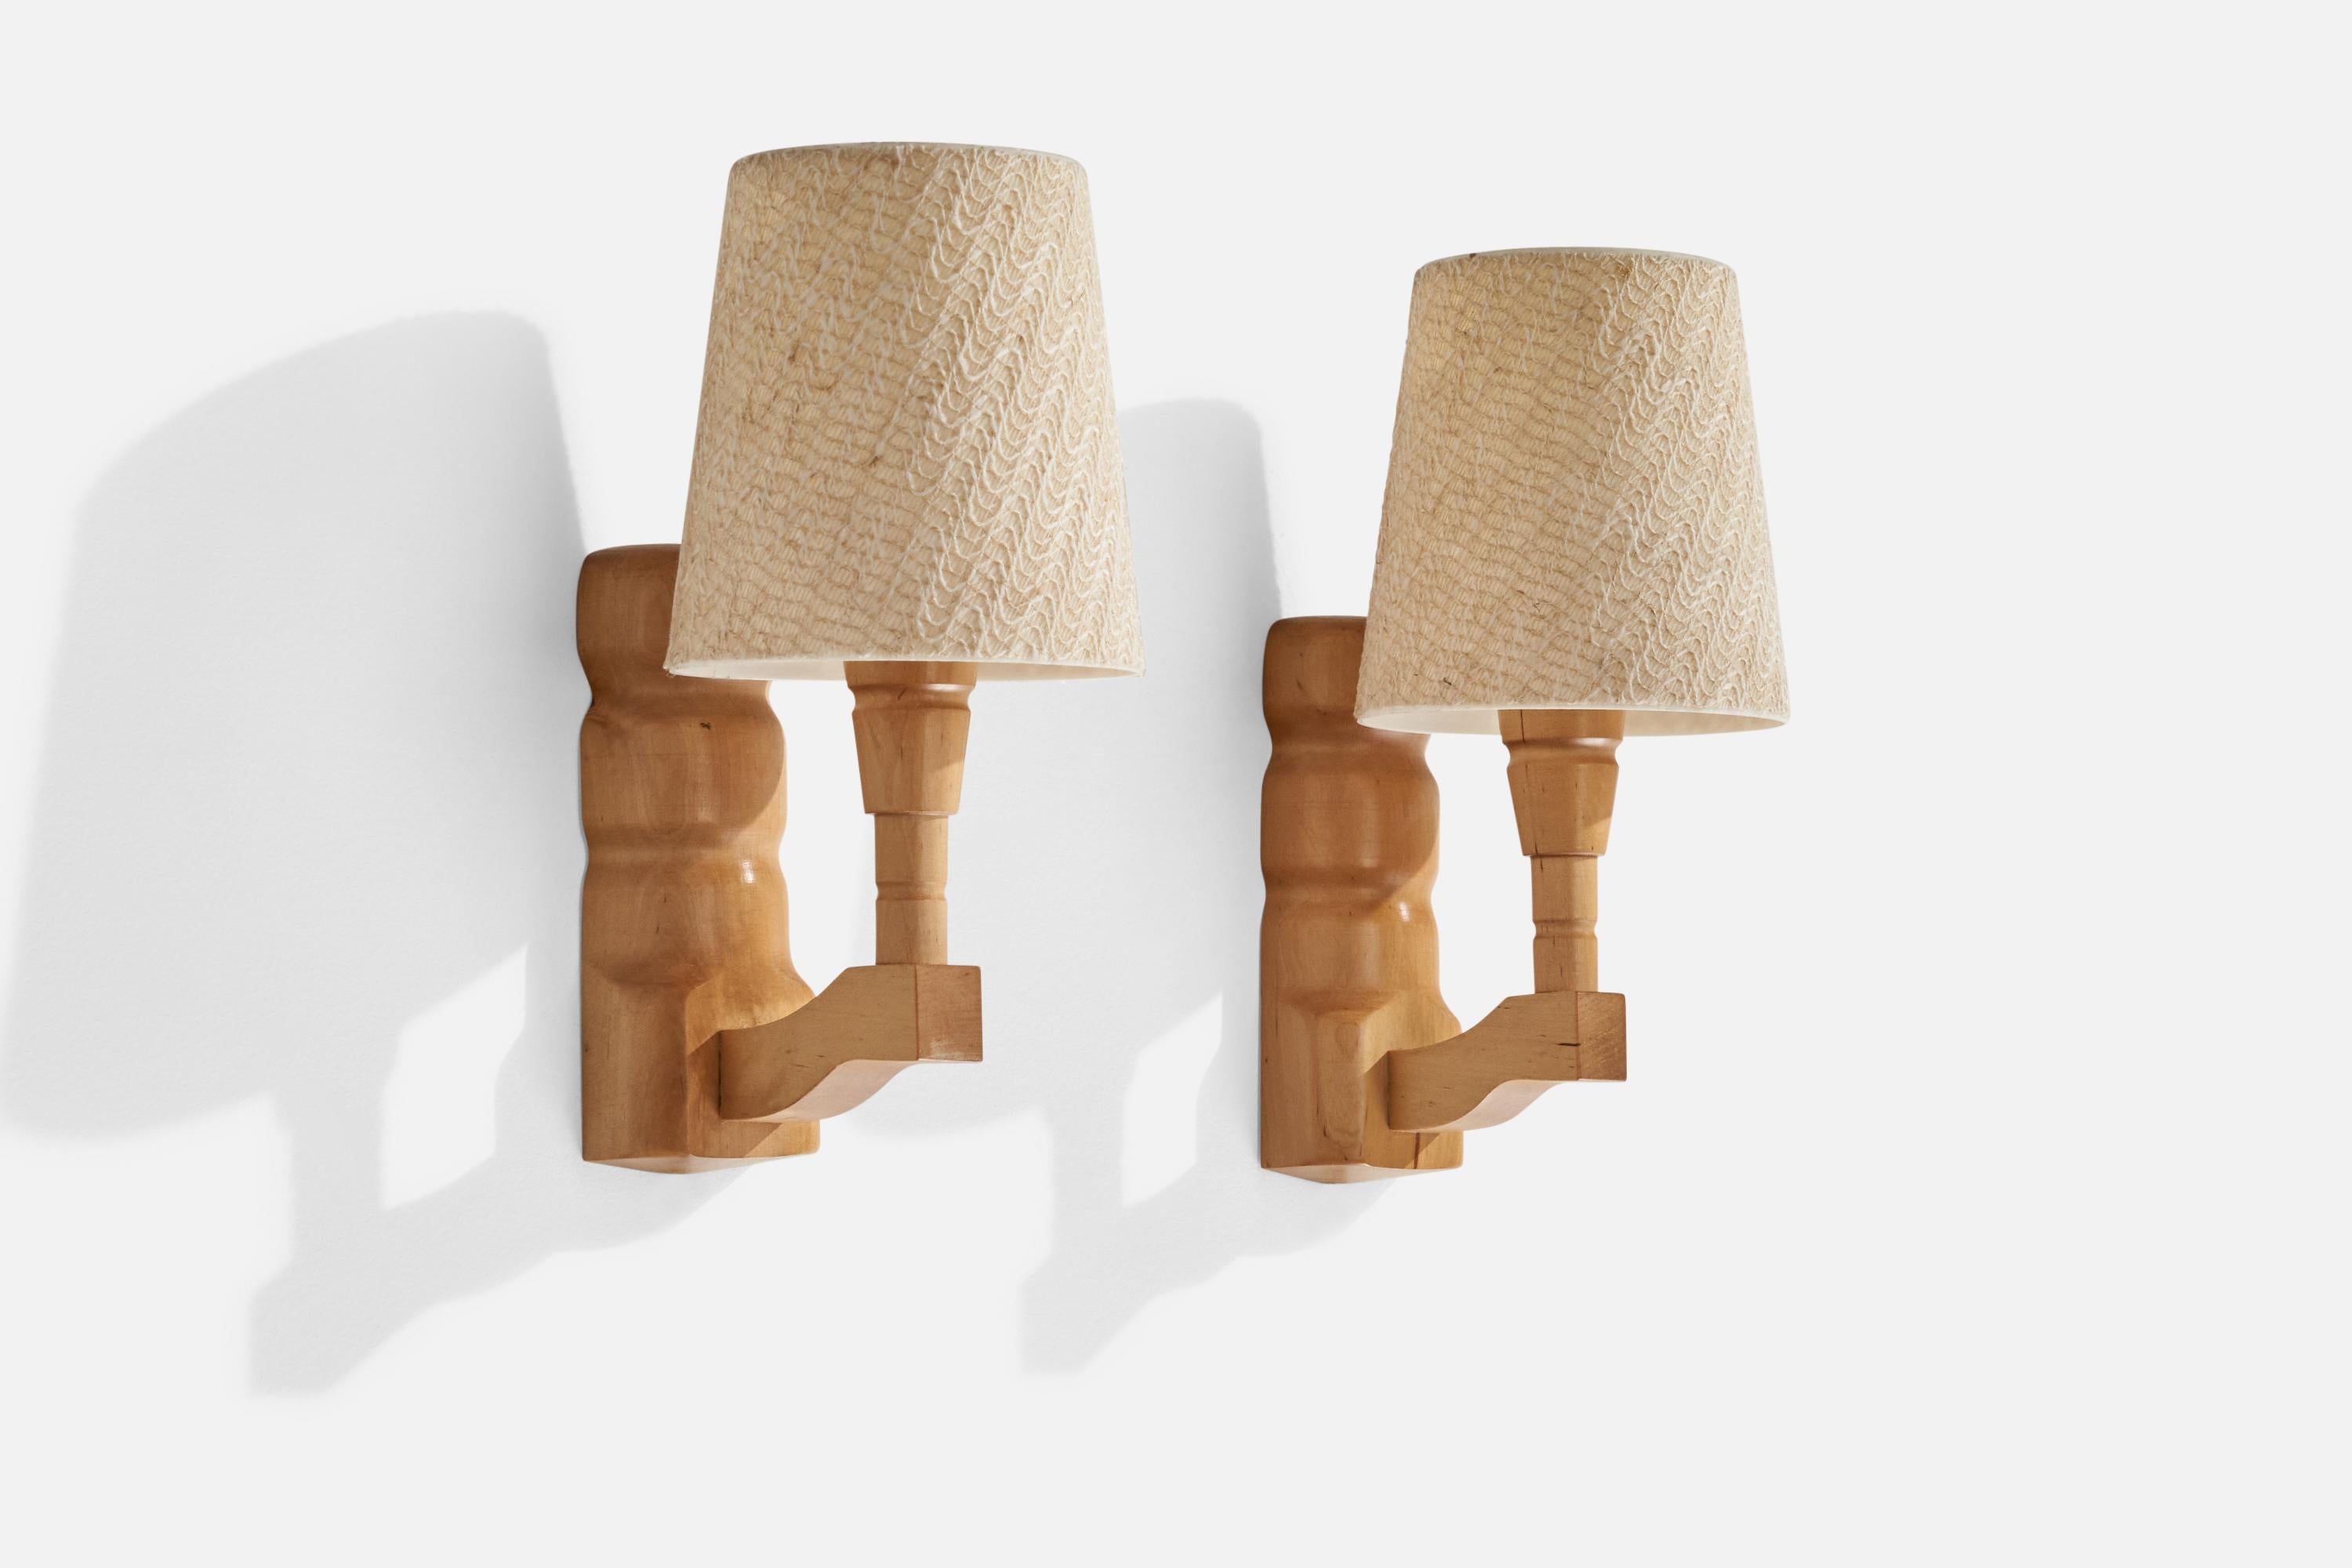 A pair of wood, acrylic and beige fabric wall lights designed and produced in Sweden, dated 1987.

Overall Dimensions (inches): 7.25” H x 5” W x 9.5” D
Back Plate Dimensions (inches): 7” H x 1.47” W x 0.38” D
Bulb Specifications: E-26 Bulb
Number of